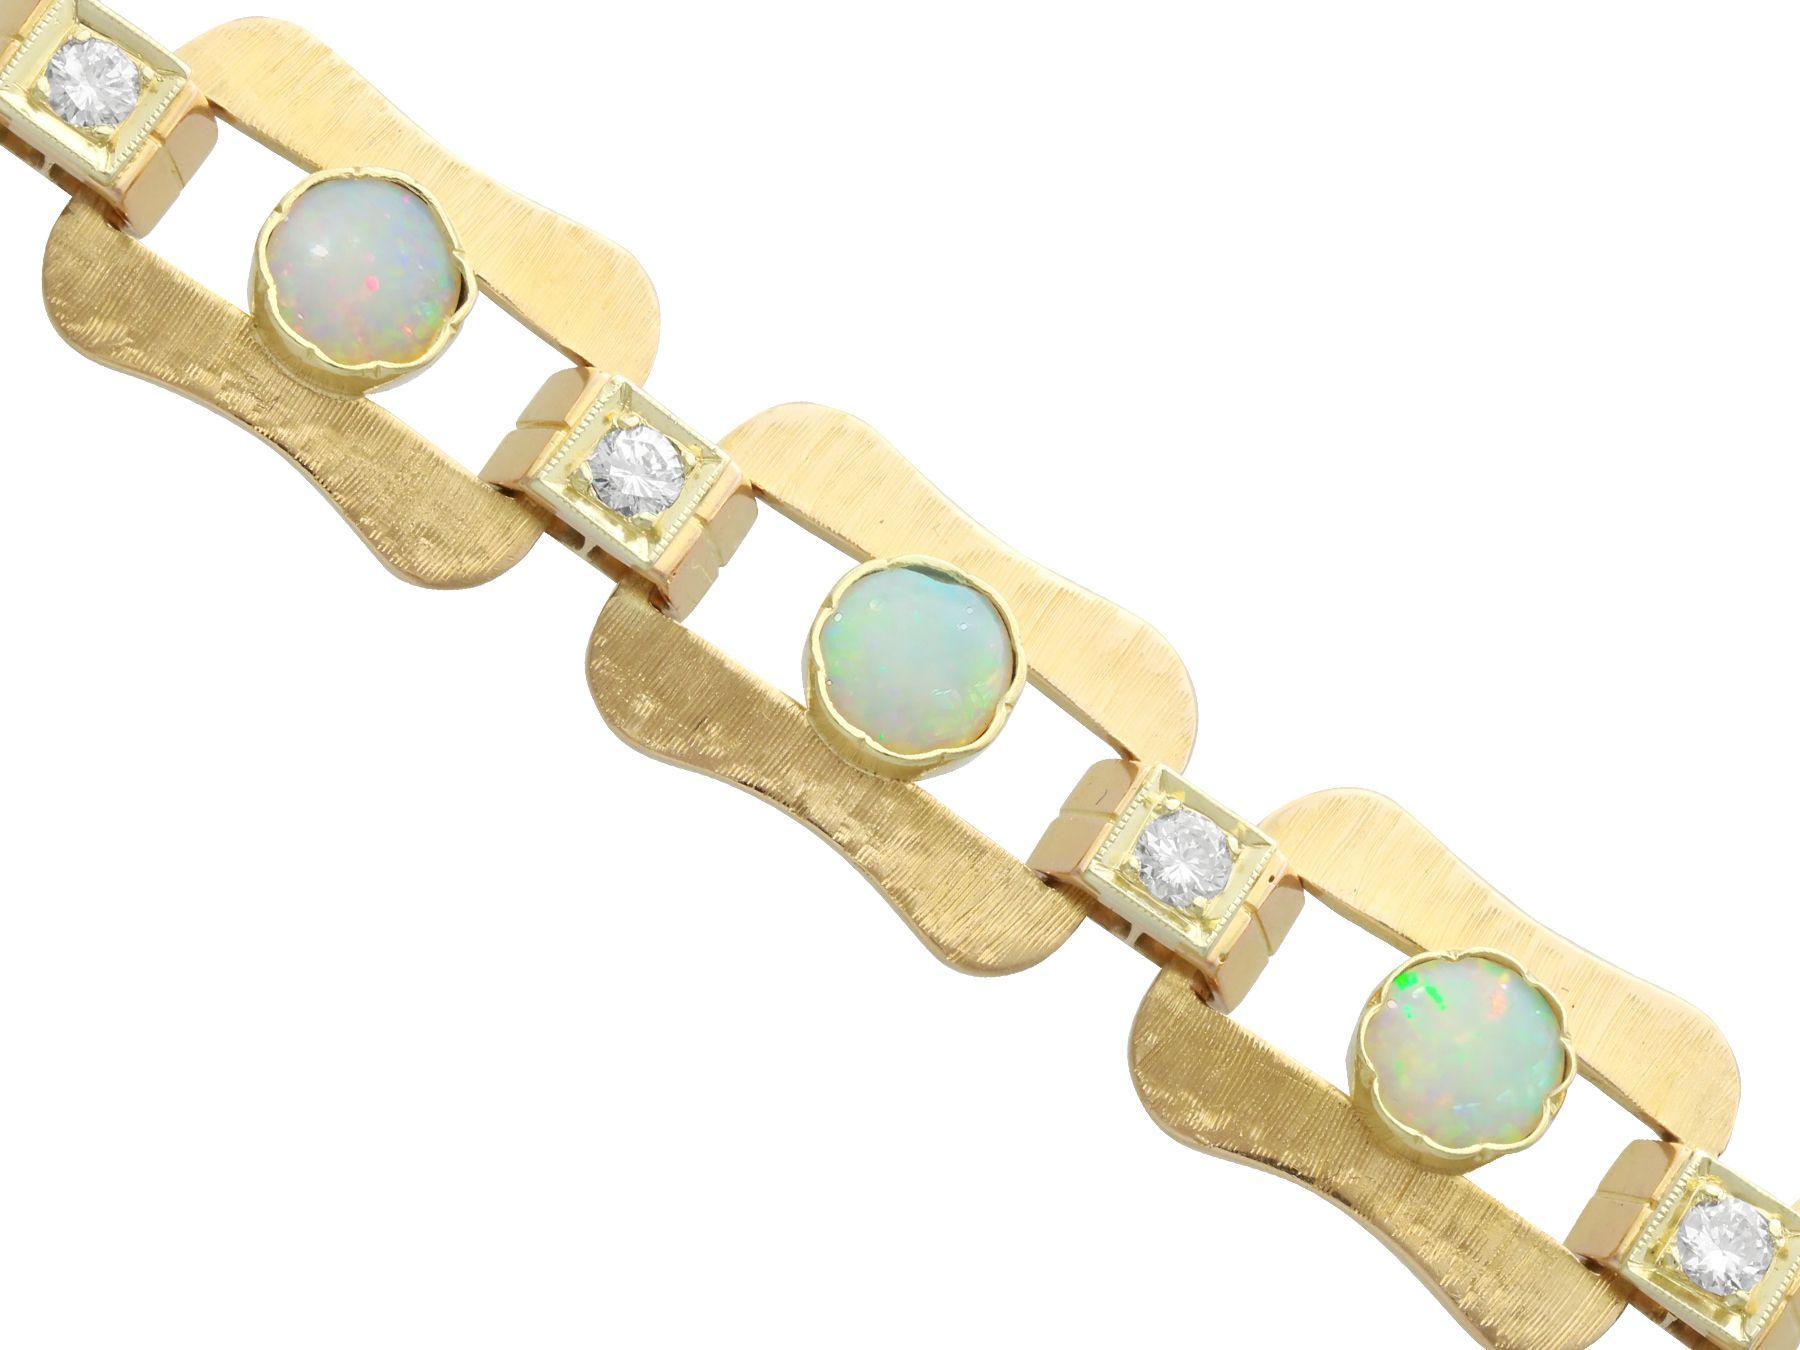 Antique 4.10 Carat Opal and 0.72 Carat Diamond Yellow Gold Bracelet In Excellent Condition For Sale In Jesmond, Newcastle Upon Tyne